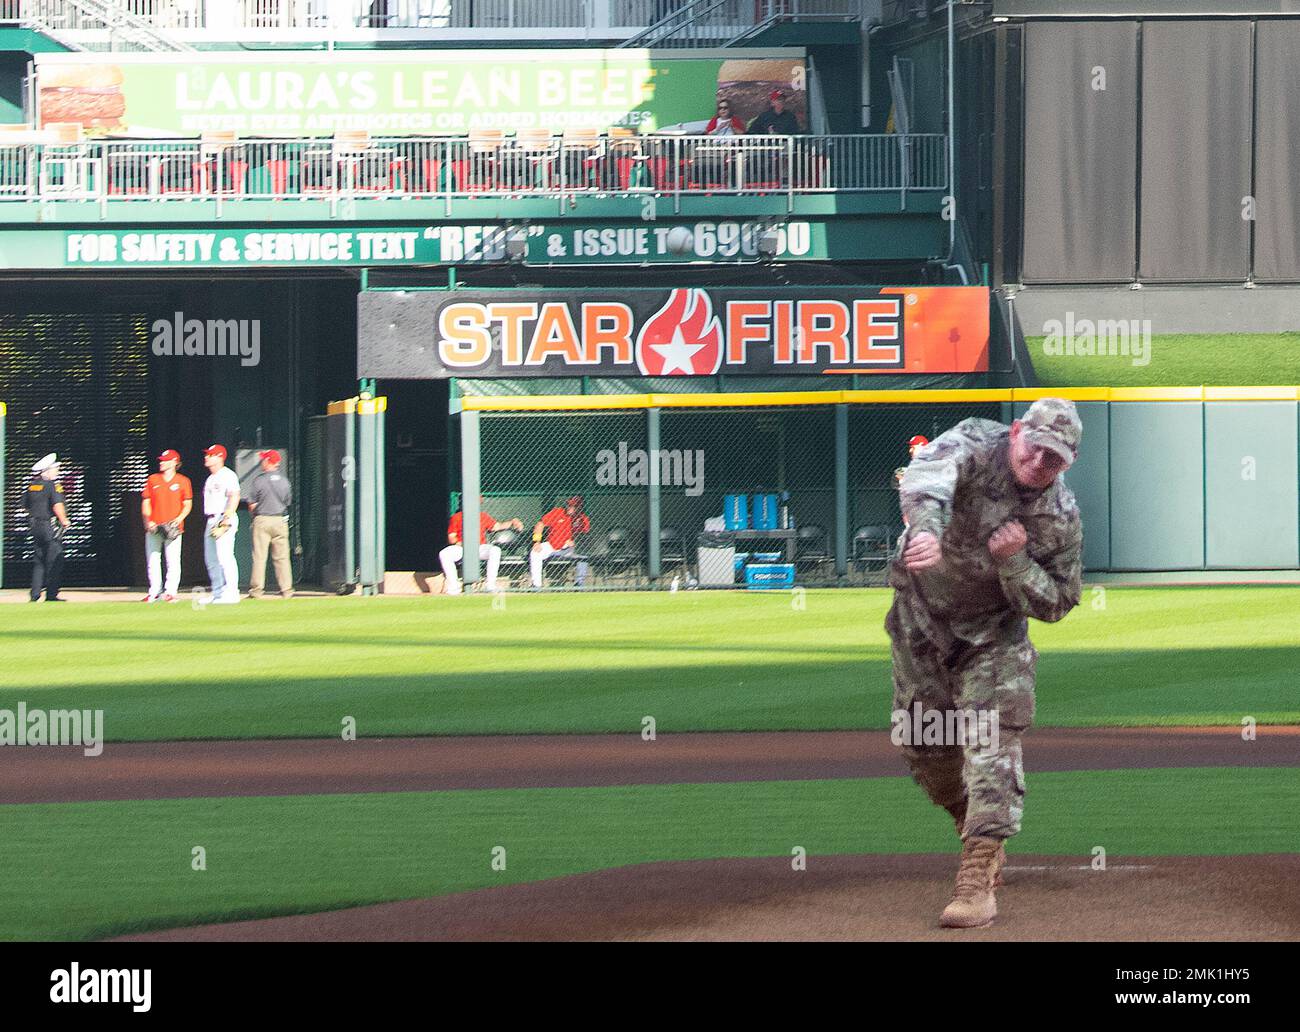 Col. Christopher Meeker, 88th Air Base Wing and Wright-Patterson Air Force Base commander, throws the ceremonial first pitch before the Reds vs. Rockies game Sept. 2, 2022, at Great American Ball Park in Cincinnati. Meeker was invited to throw out the pitch as part of the Reds’ annual Military Appreciation Night. Stock Photo